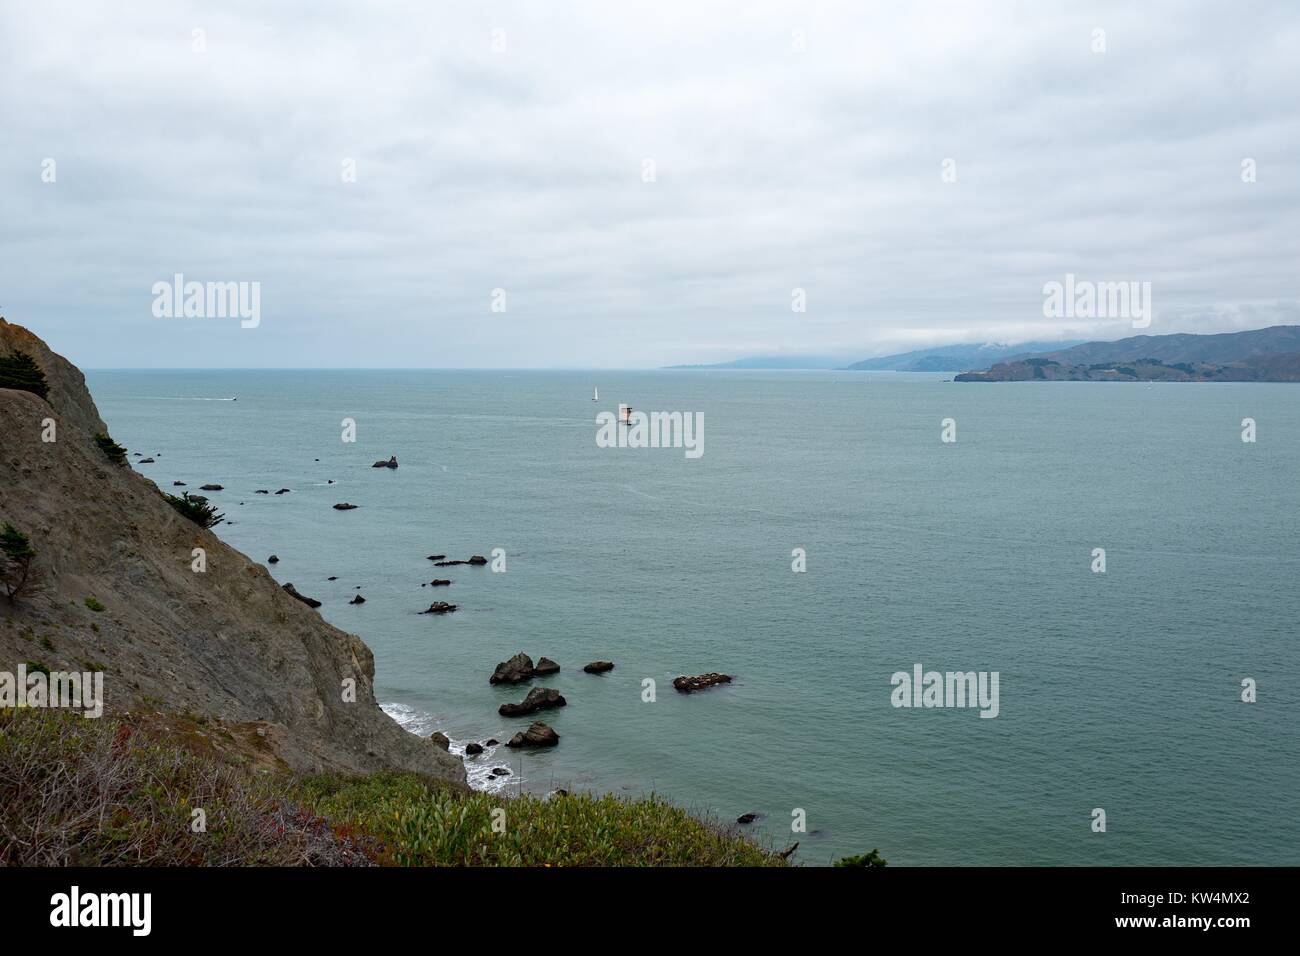 Gulf of the Farallones with cliffs leading down to the water on a foggy day, viewed from Coastal Trail in the Lands End neighborhood of San Francisco, California, August 27, 2016. Stock Photo